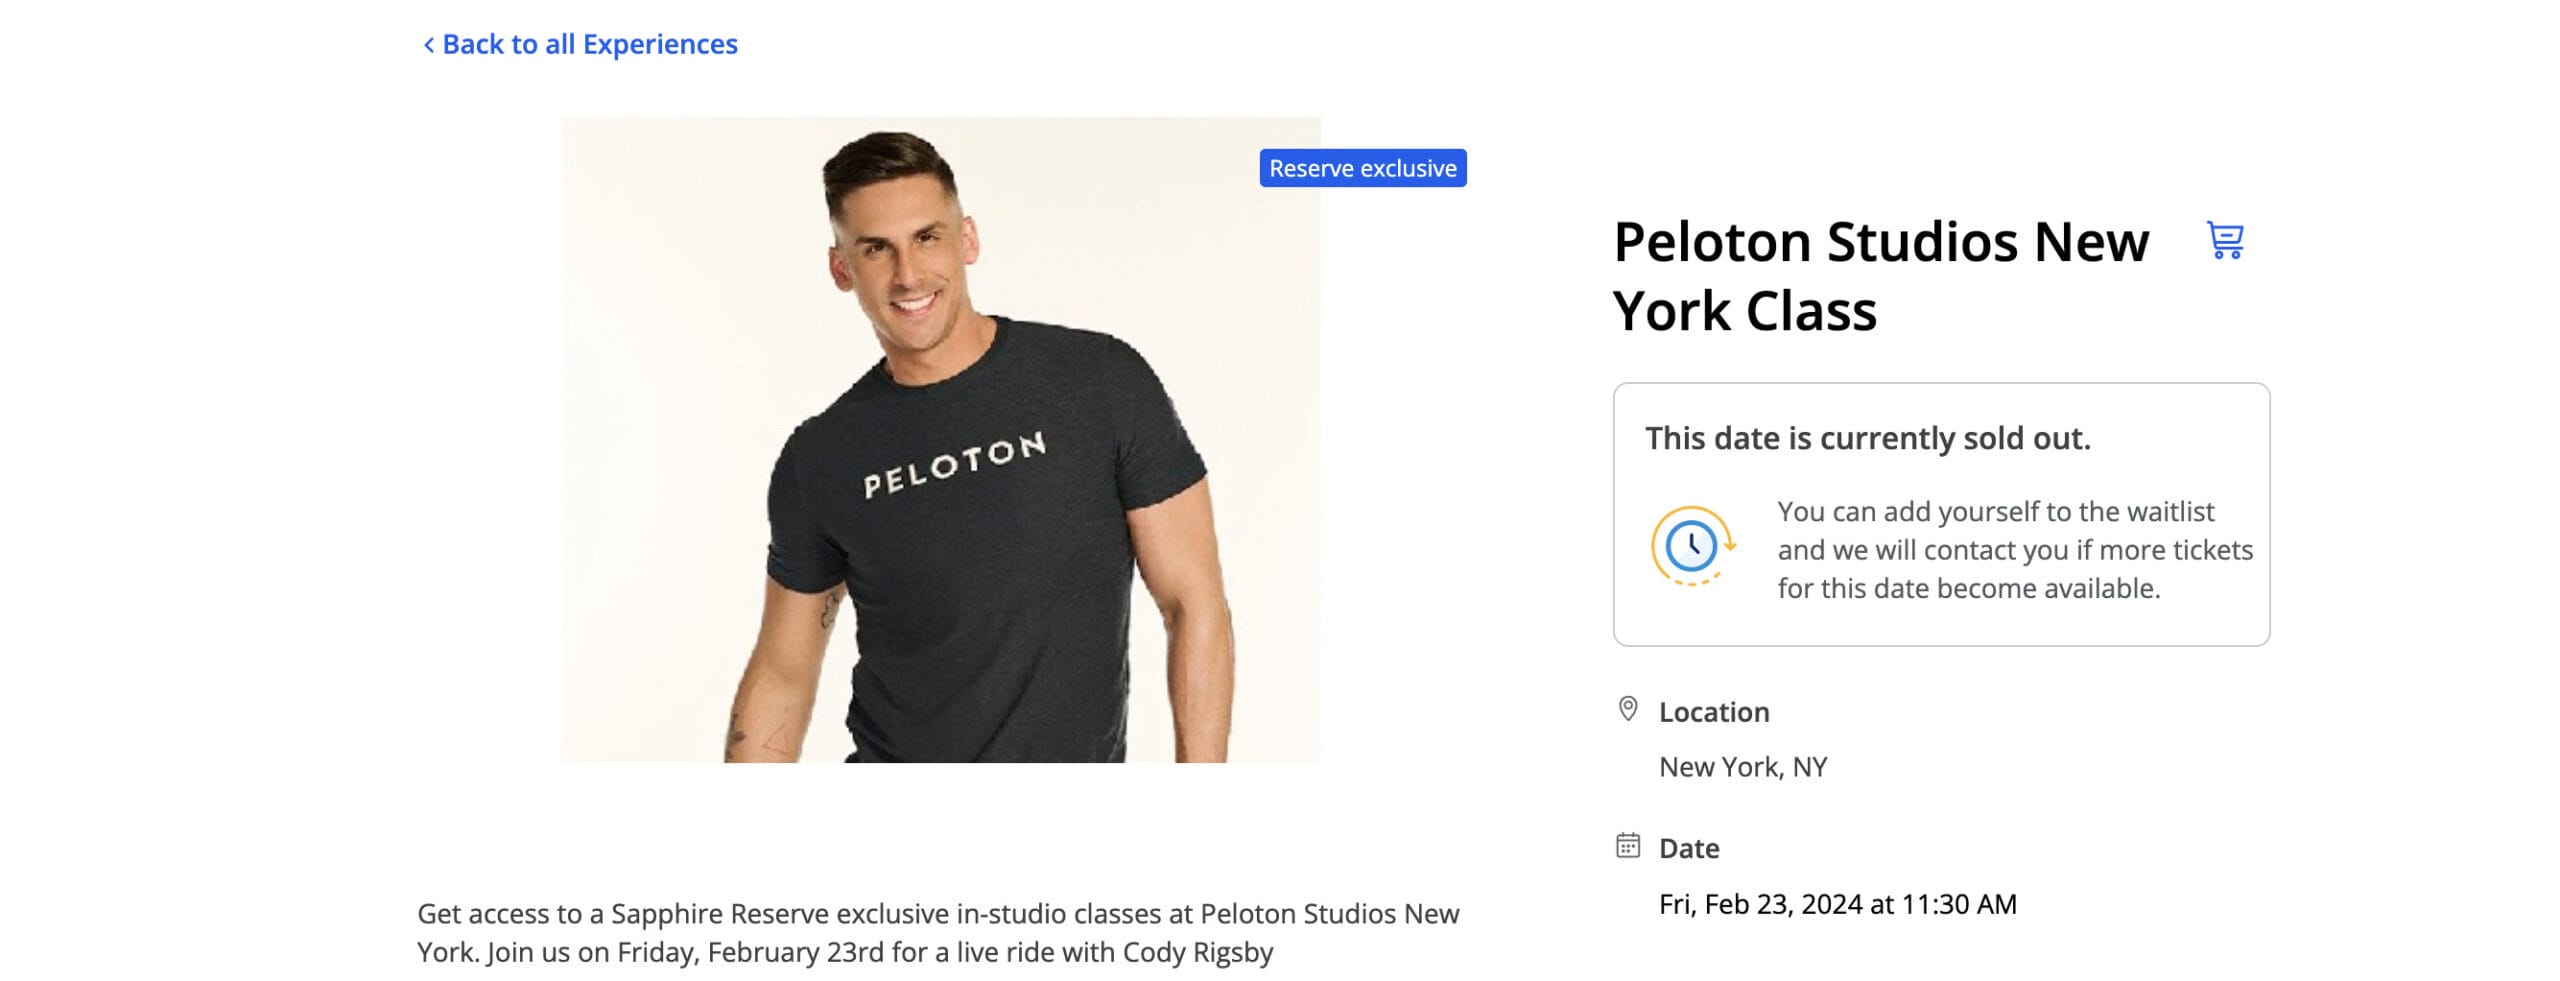 Chase members could sign up for a Cody Rigsby class at Peloton Studios New York.